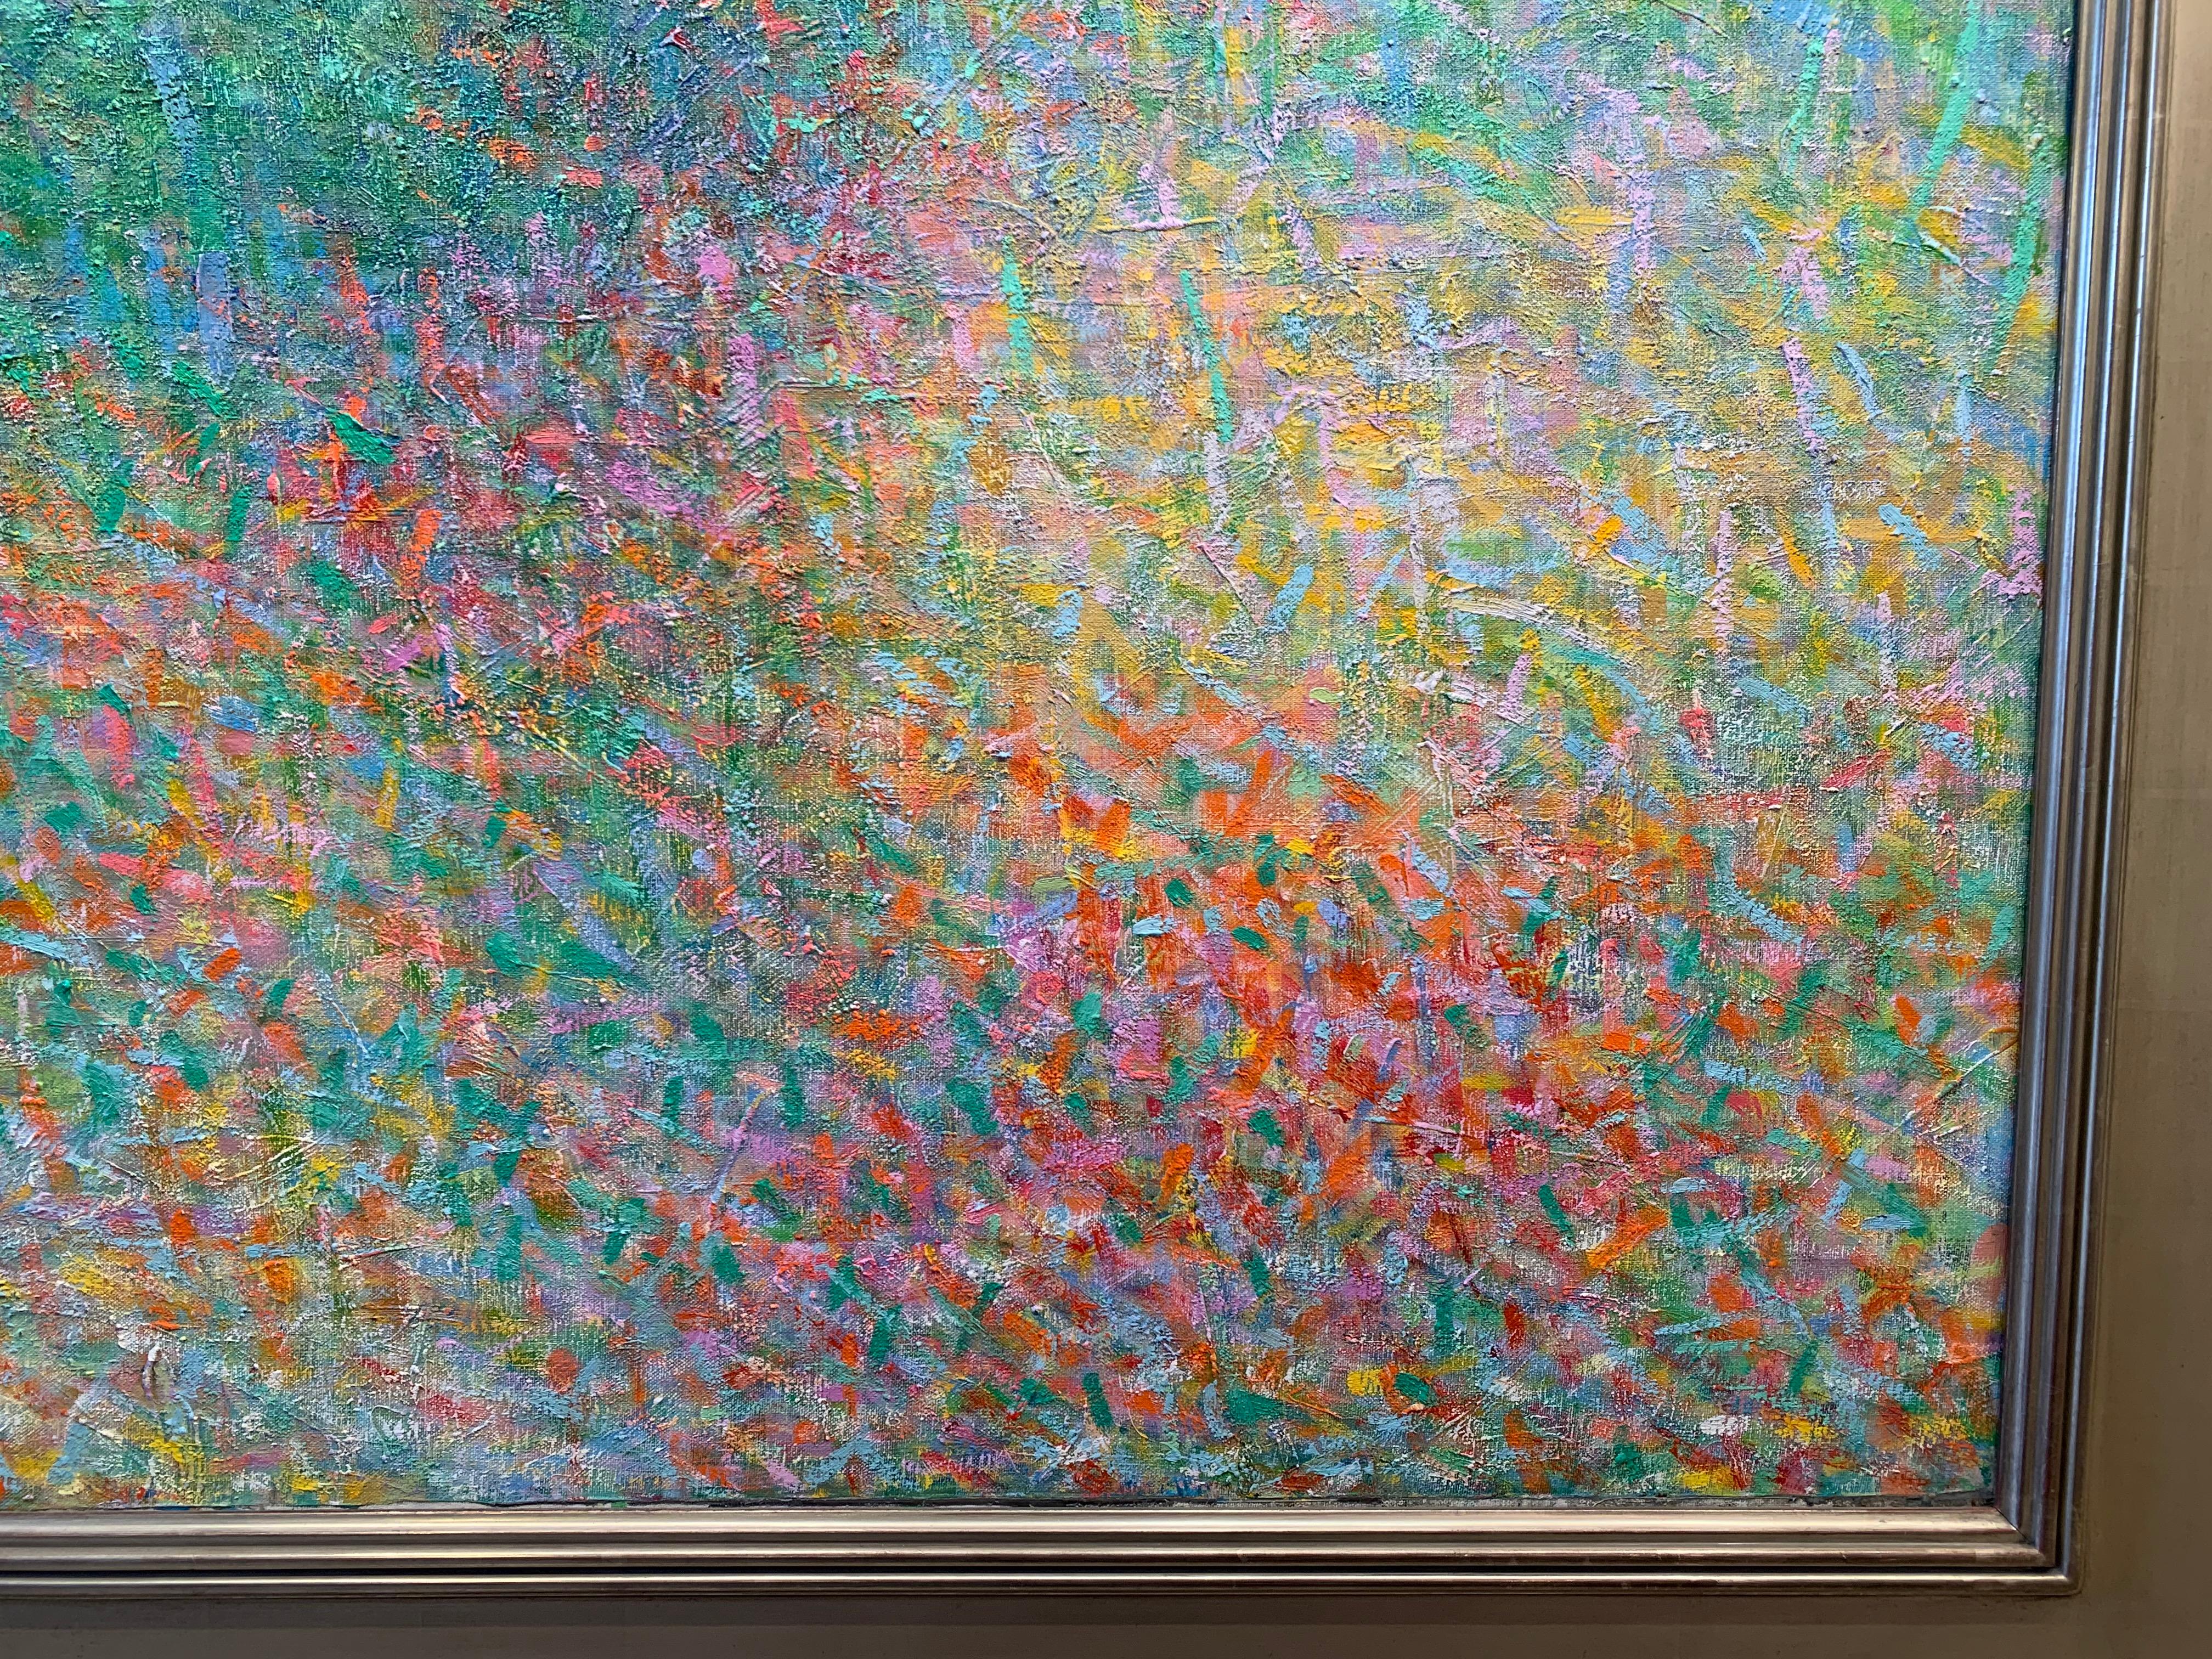 color field painting was a form of abstraction that